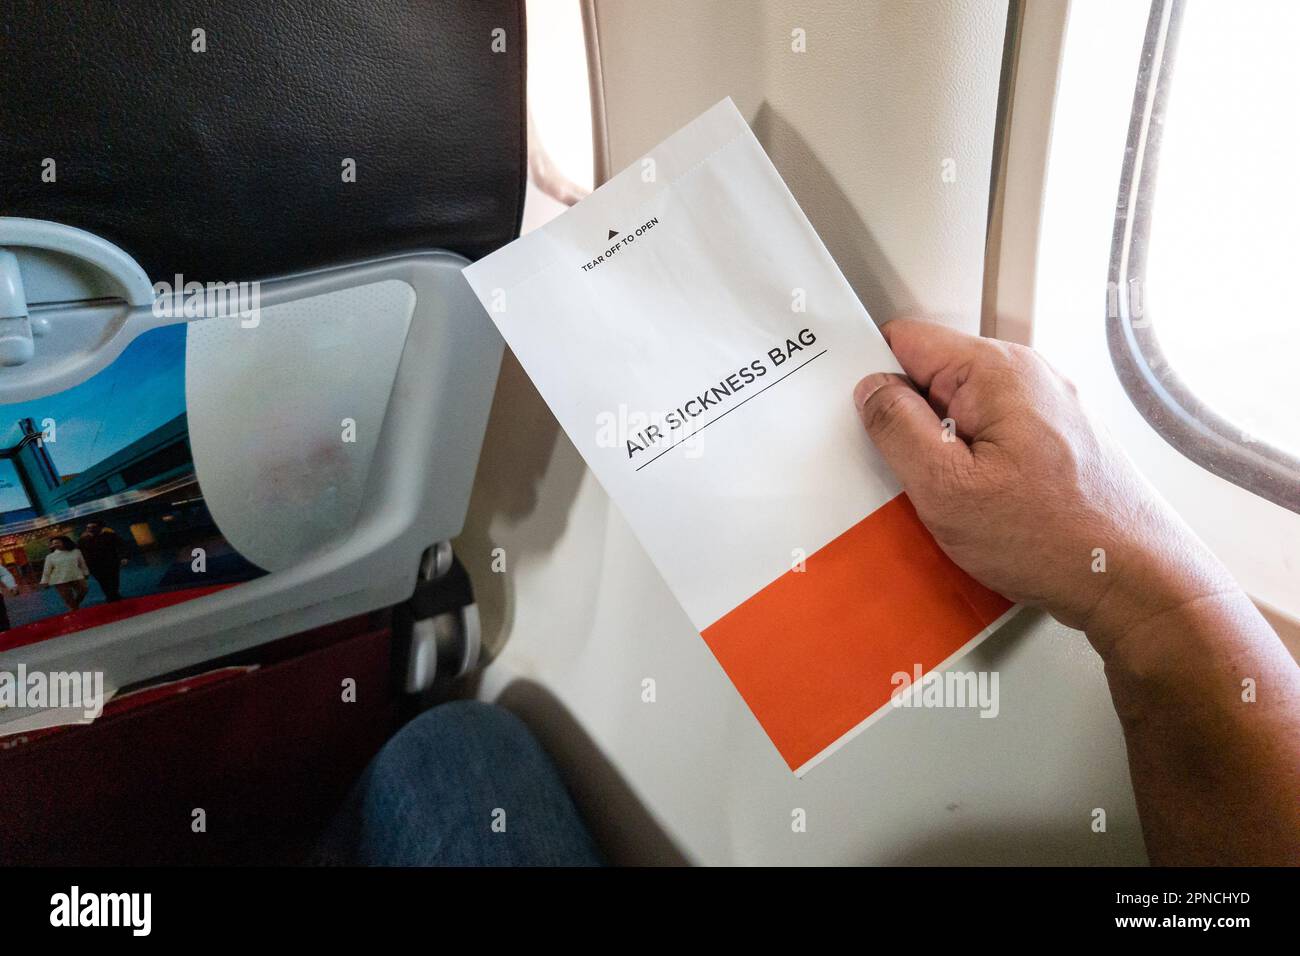 Passanger holding air sickness bag during air flight incase need to vomit Stock Photo